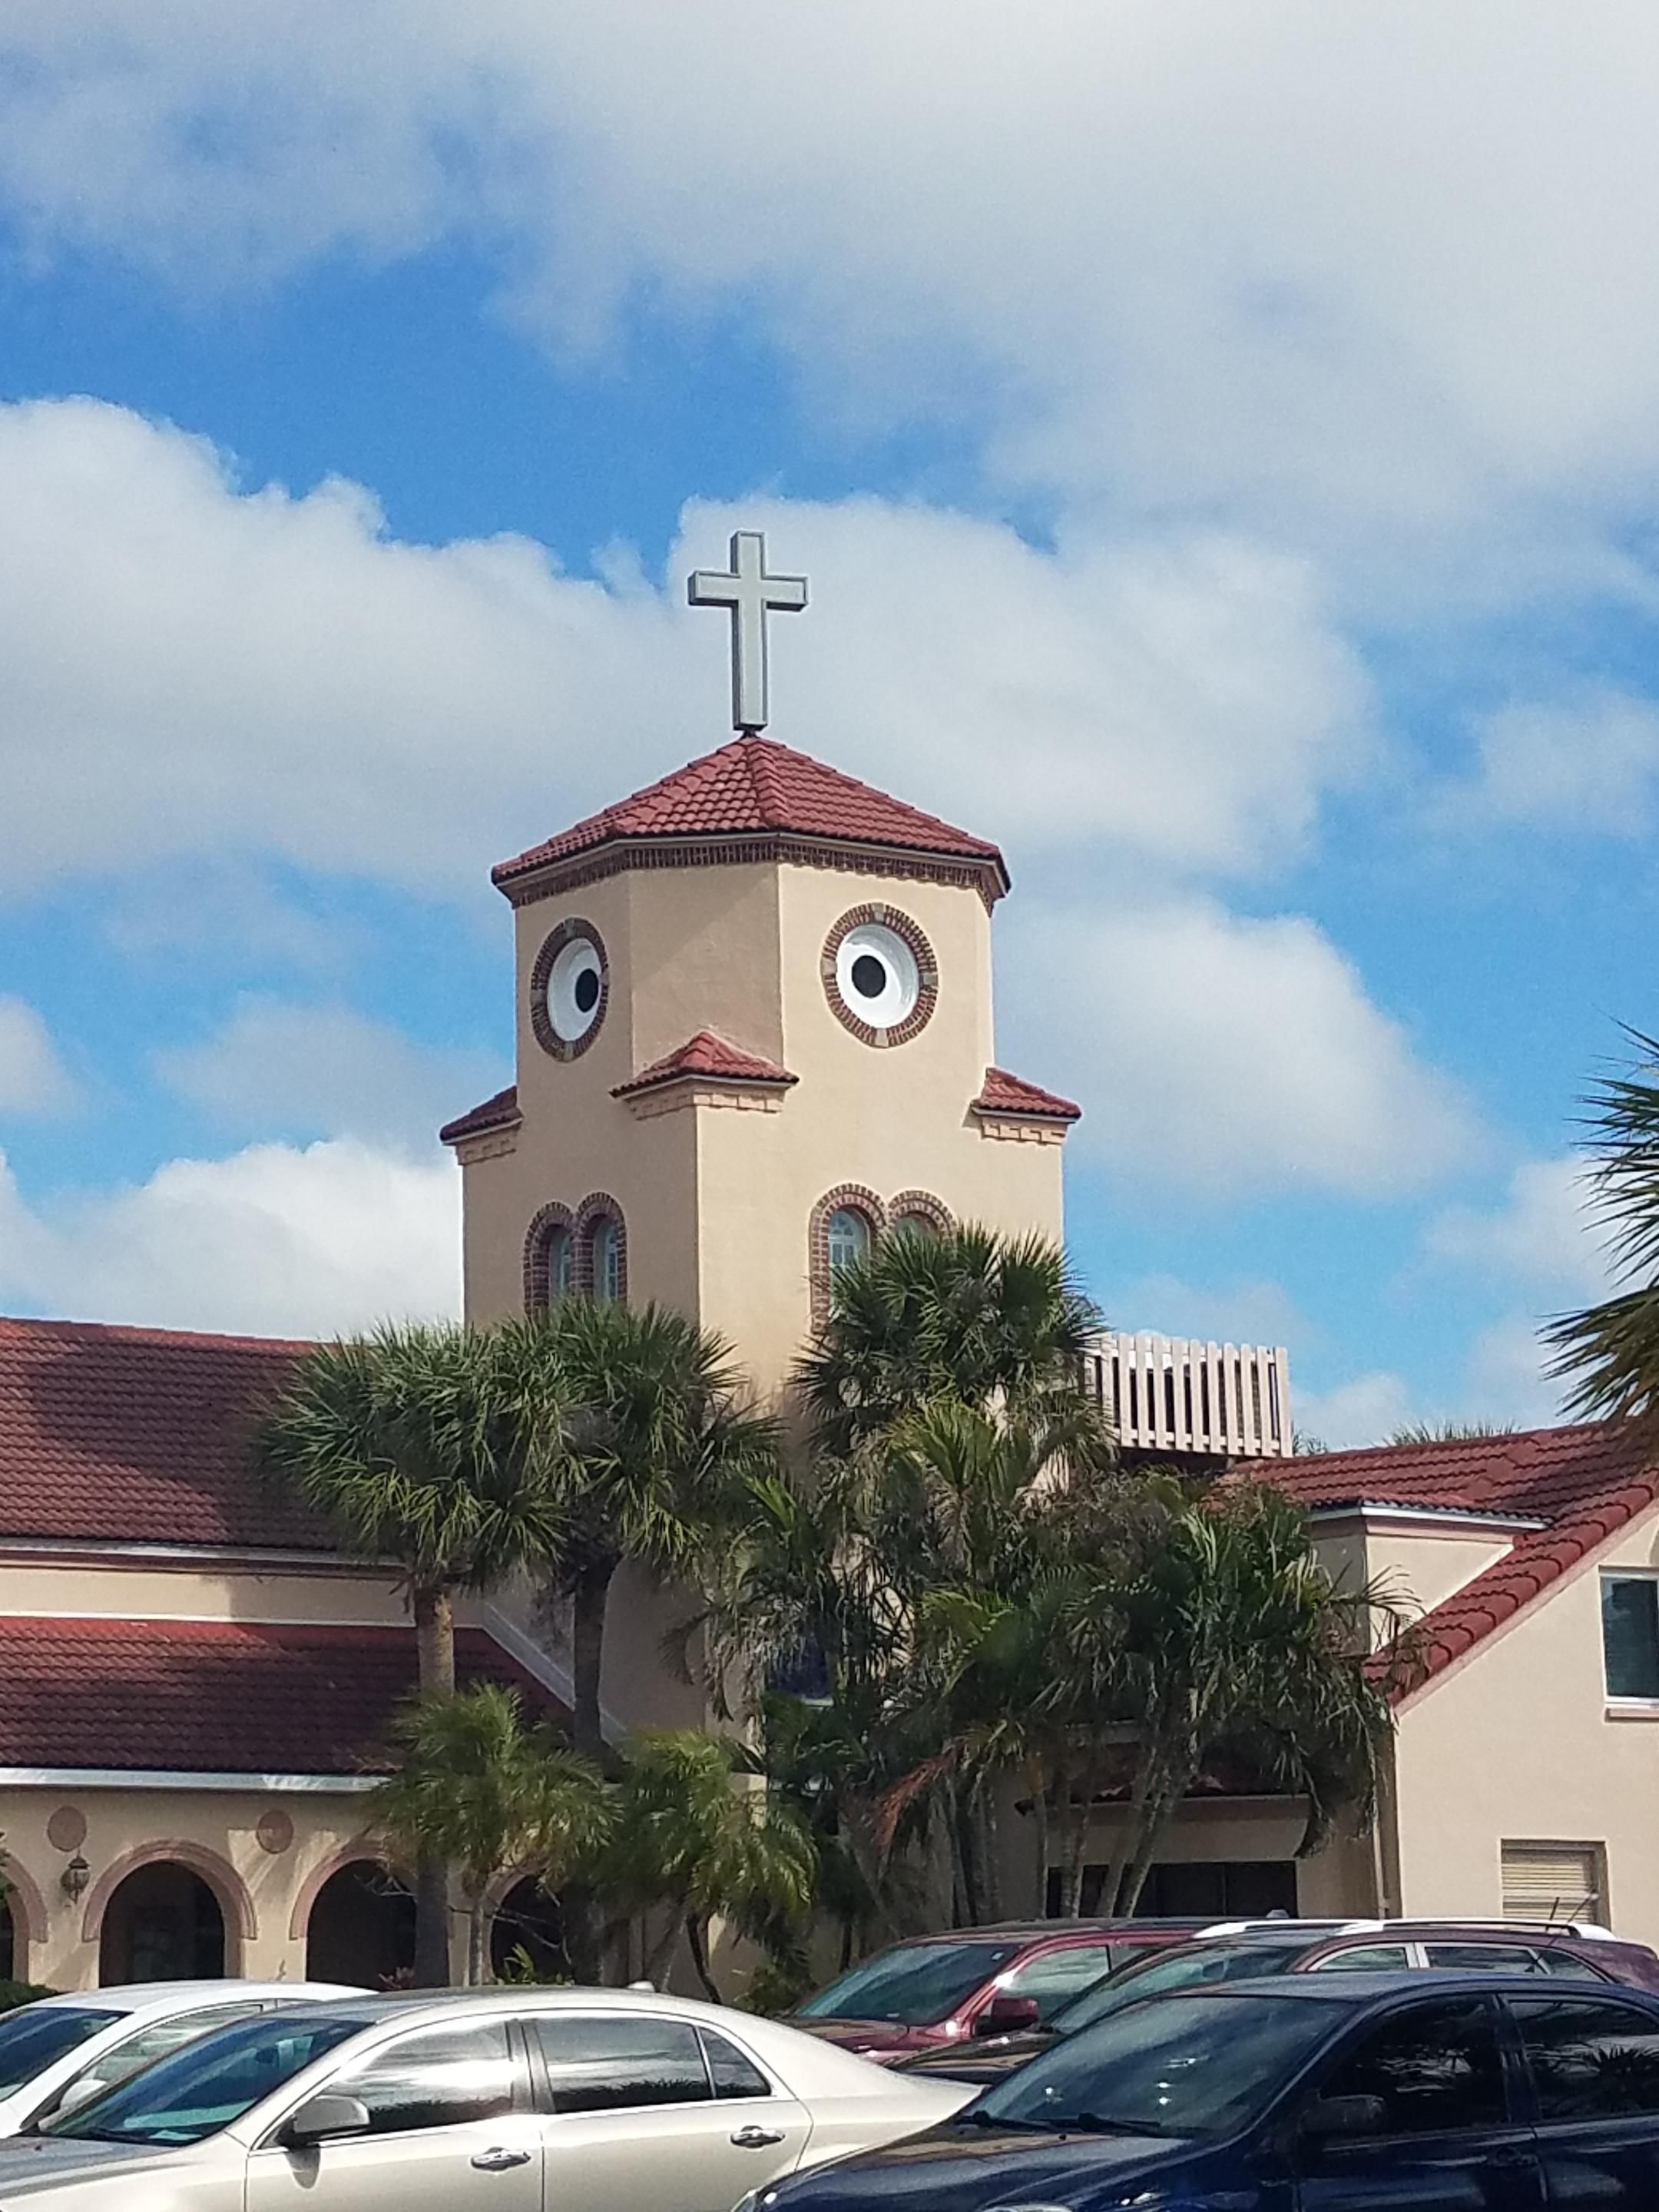 What is this? A church for owls?